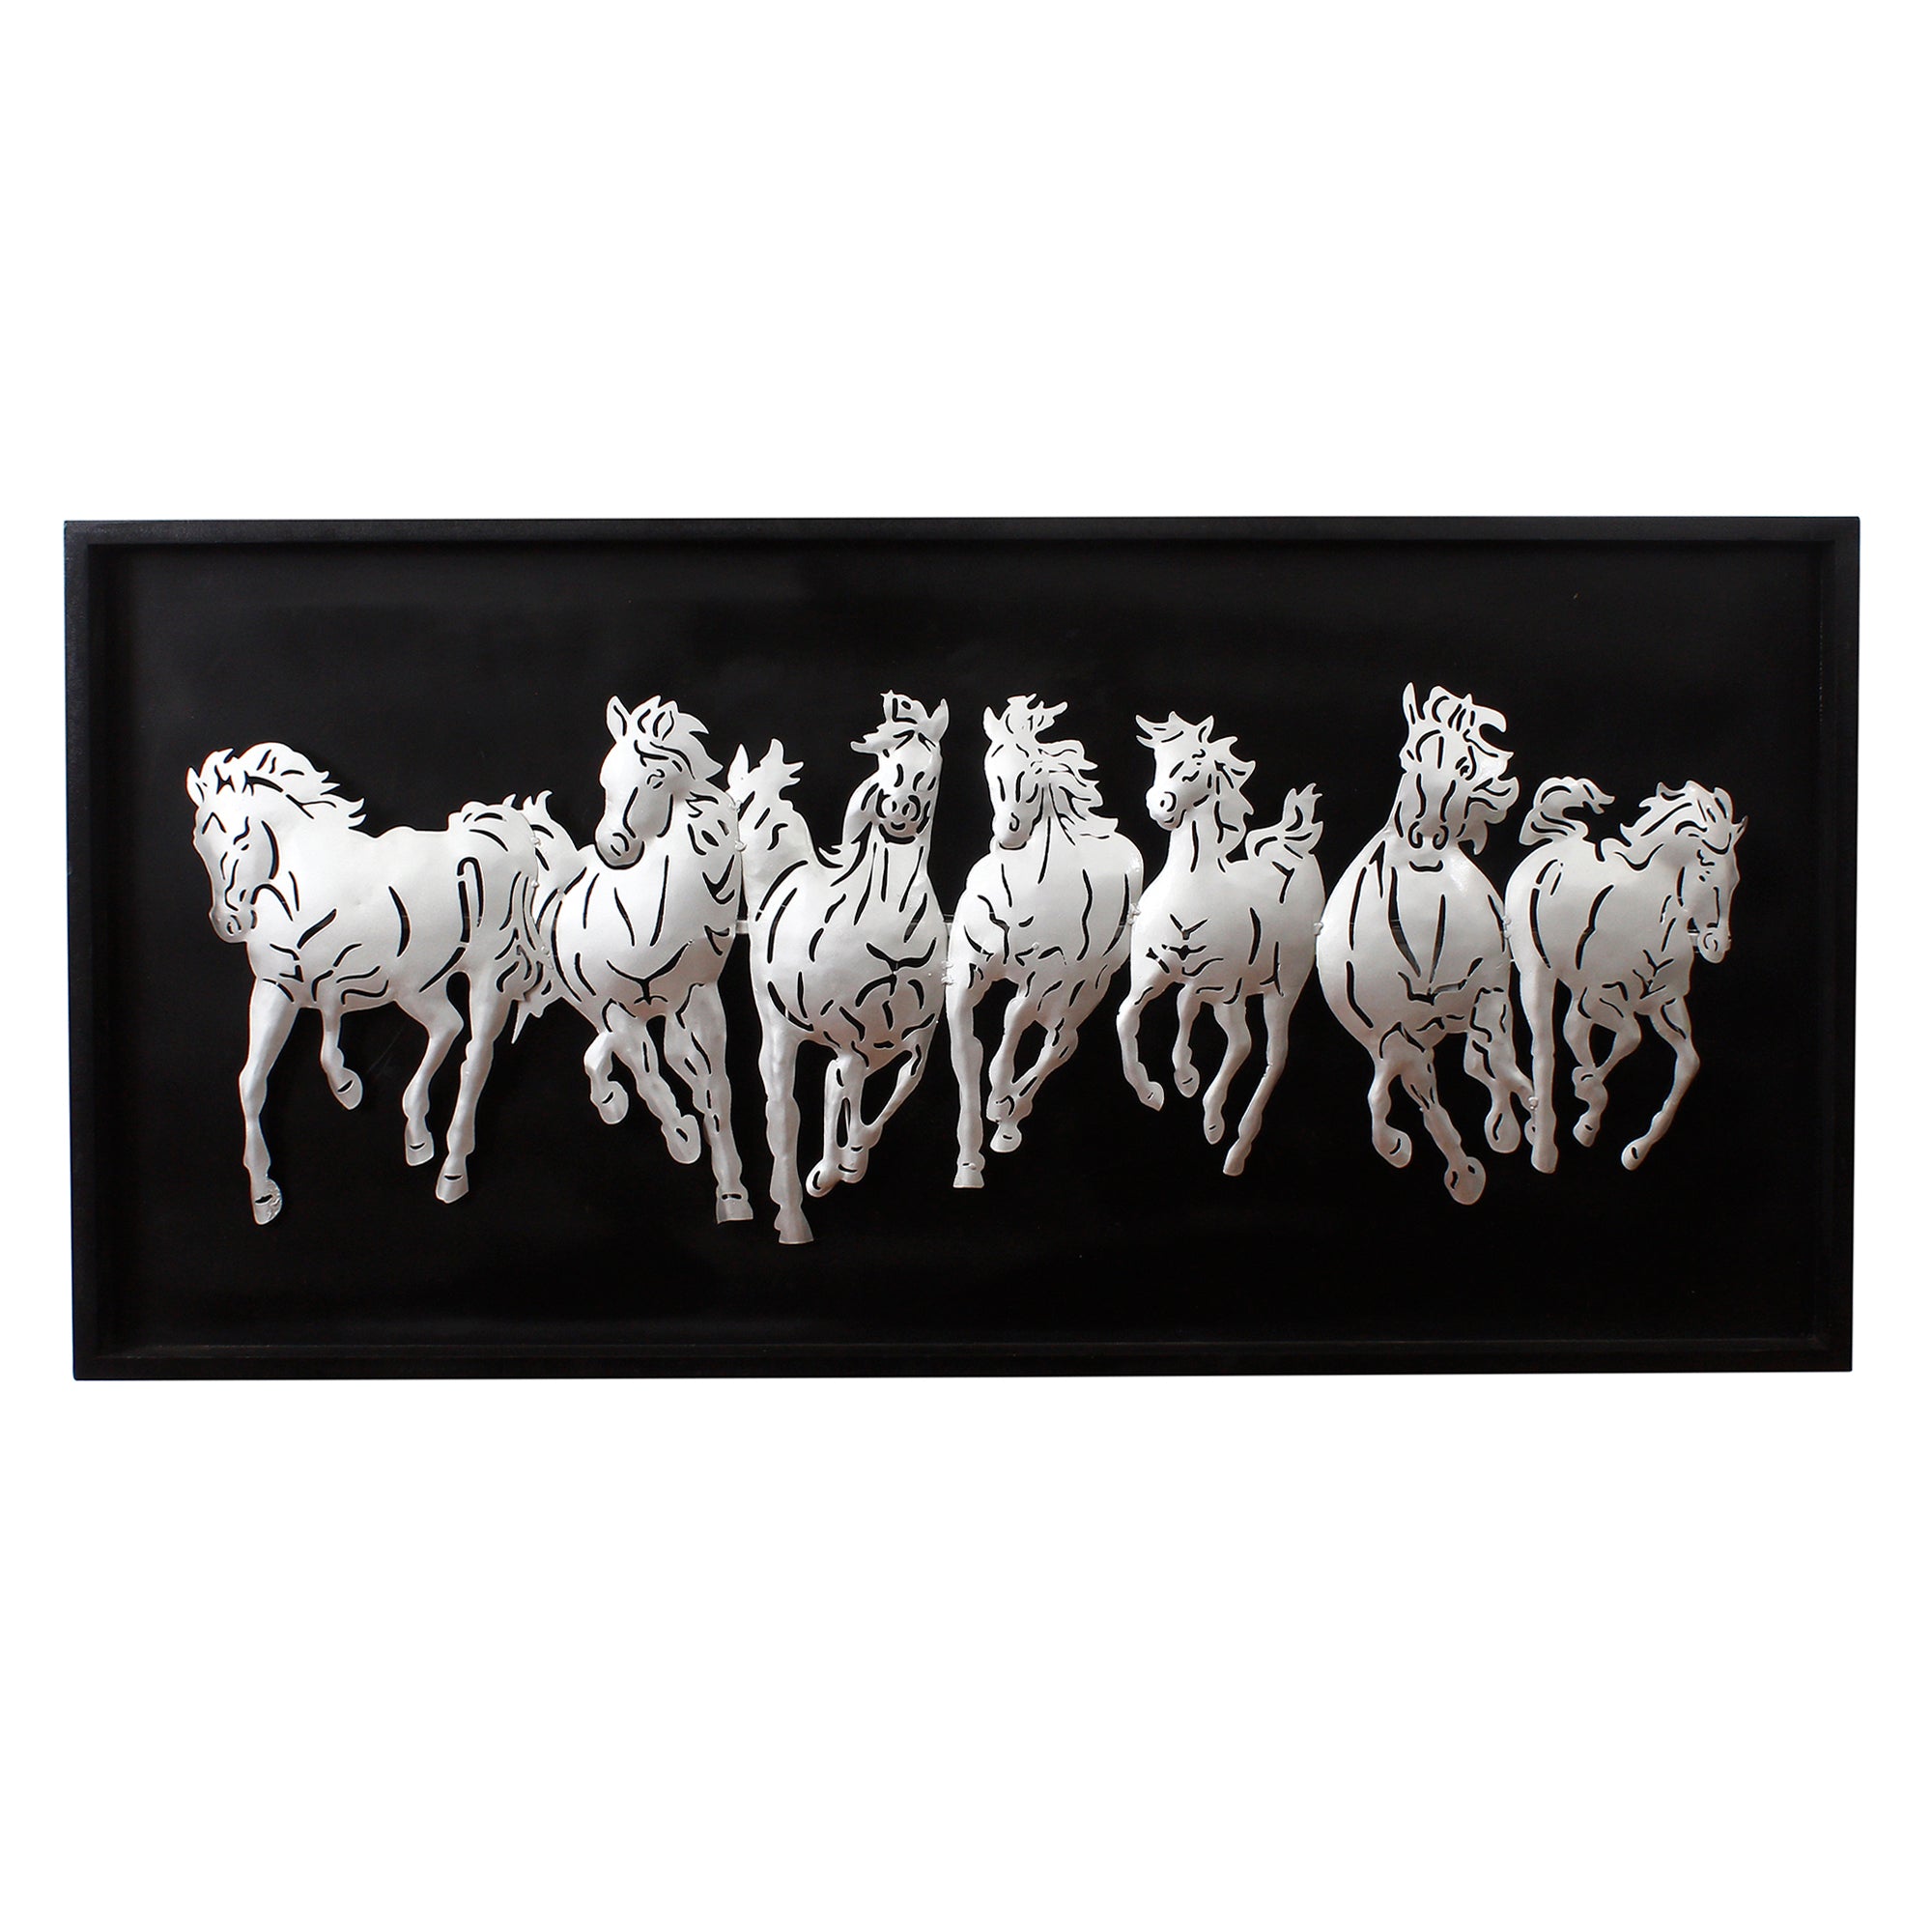 Black and Silver 7 Running Horses empanalled in Wooden Frame Handcrafted Metal Wall Hanging with Background LED's 2